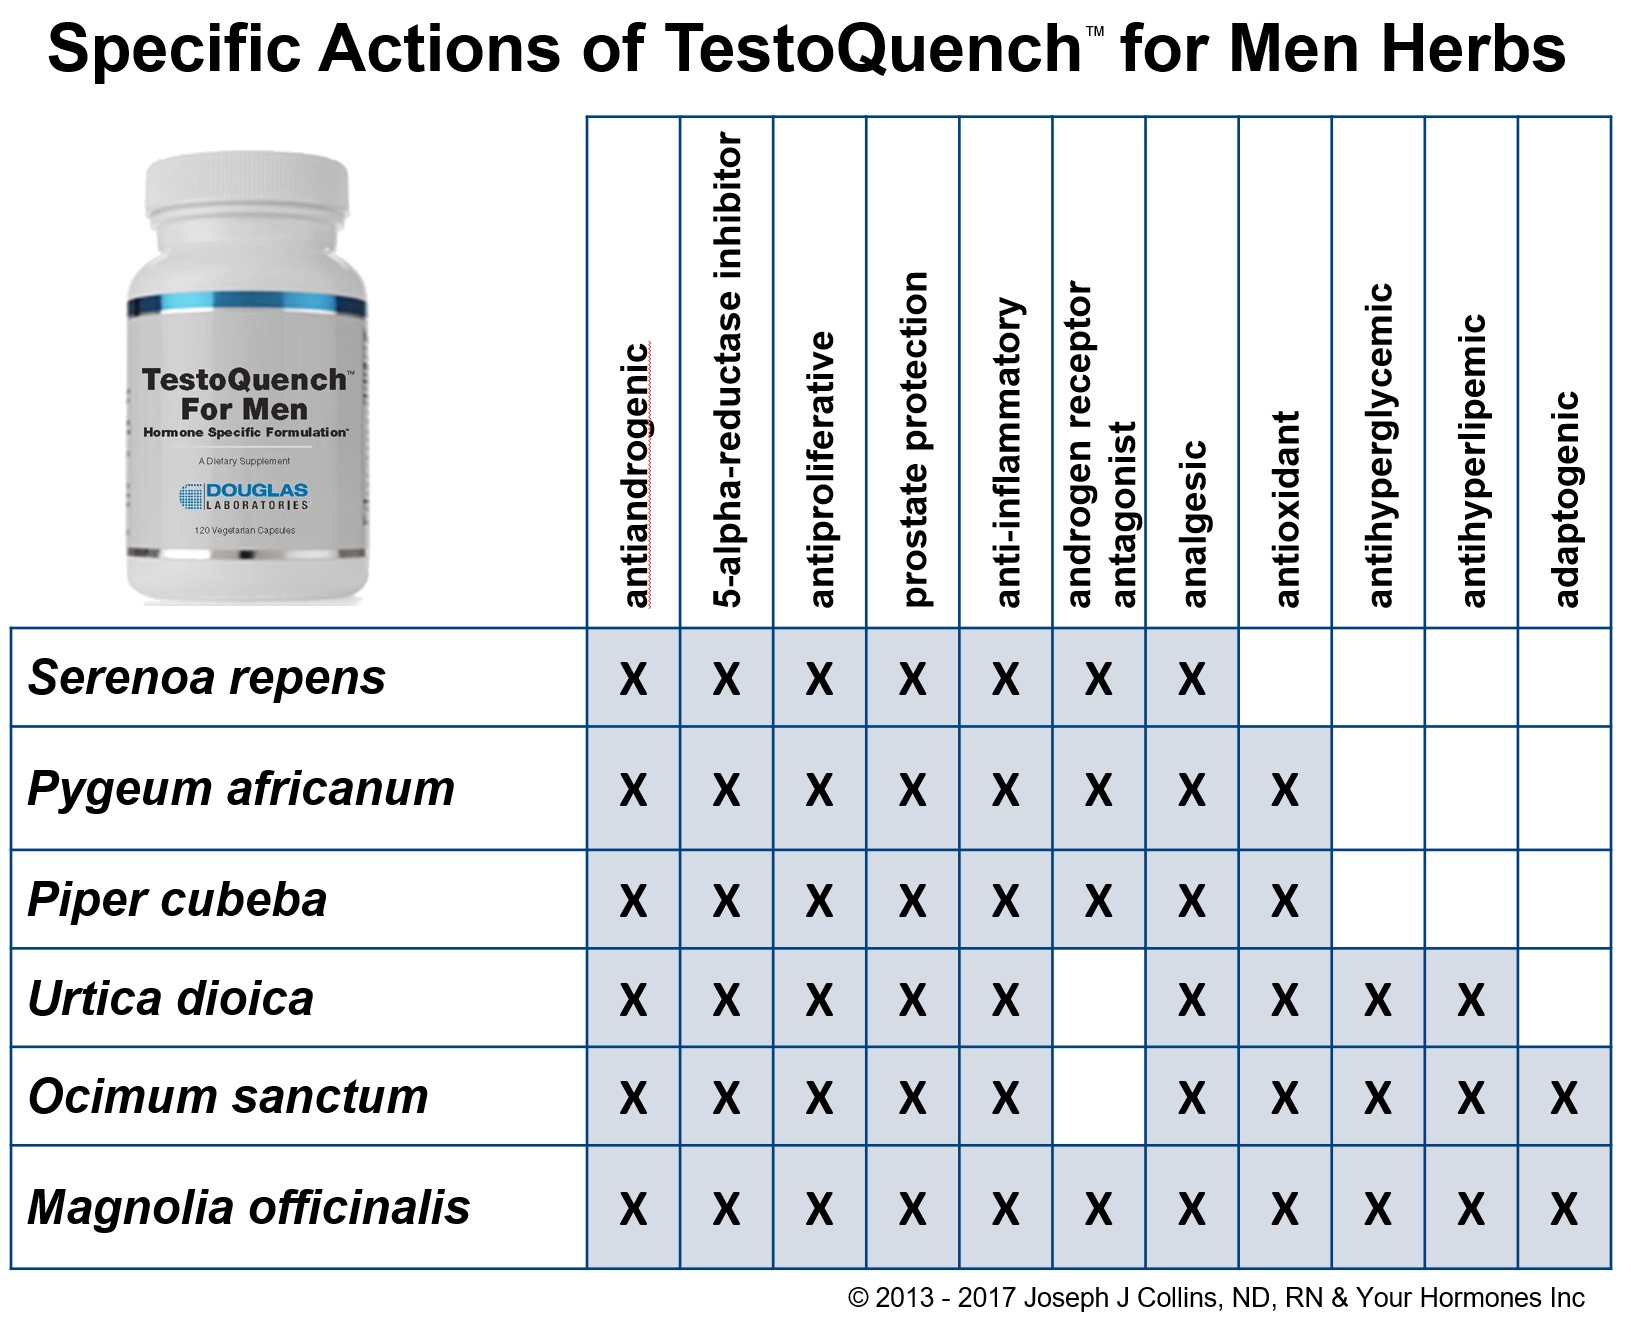 Specific Actions of herbs in TestoQuench™ for Men 